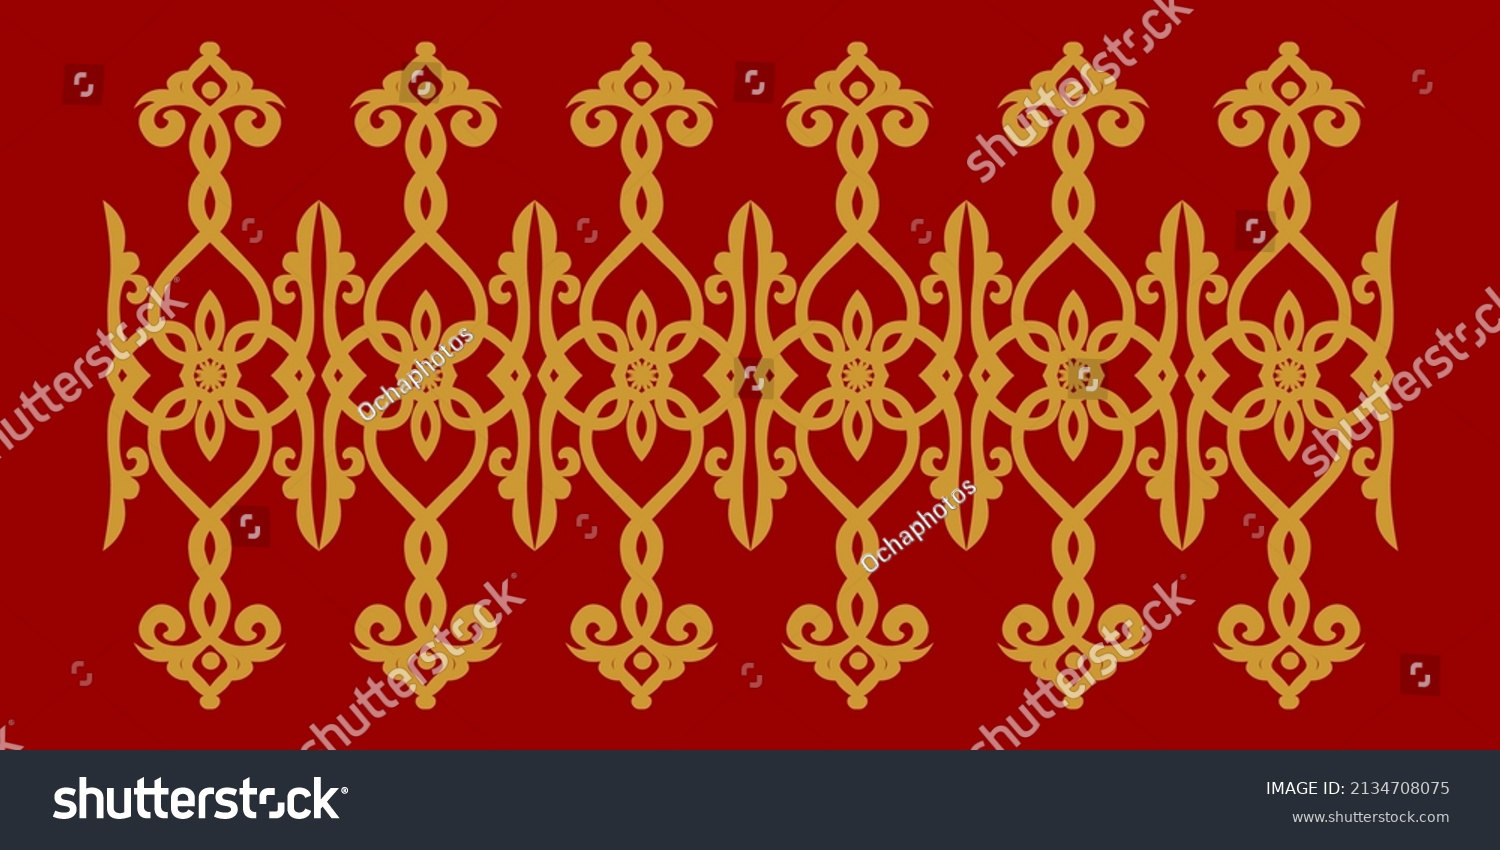 SVG of One of the traditional Batik motifs. Traditional art pattern from the province of Aceh. Indonesia svg